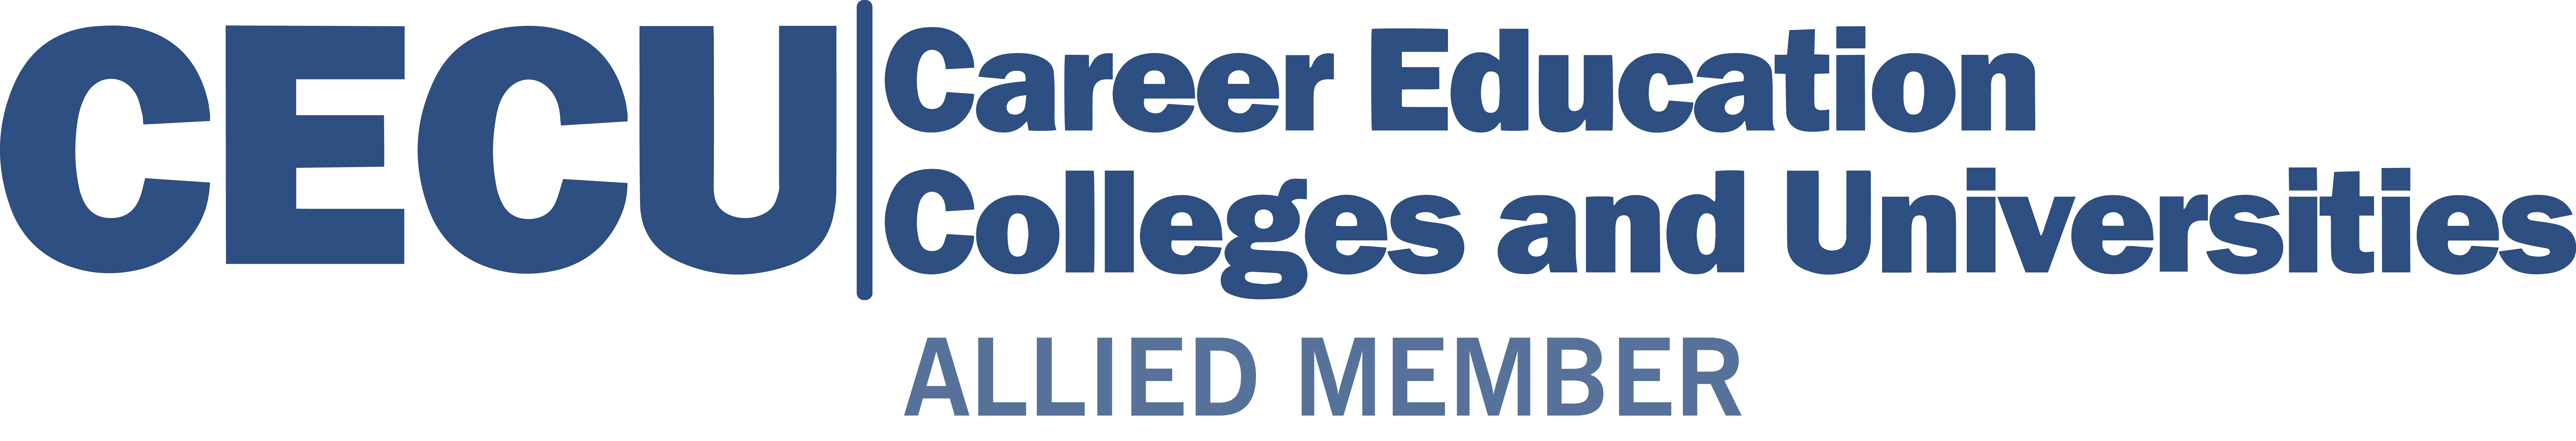 CECU career education colleges and universities allied member